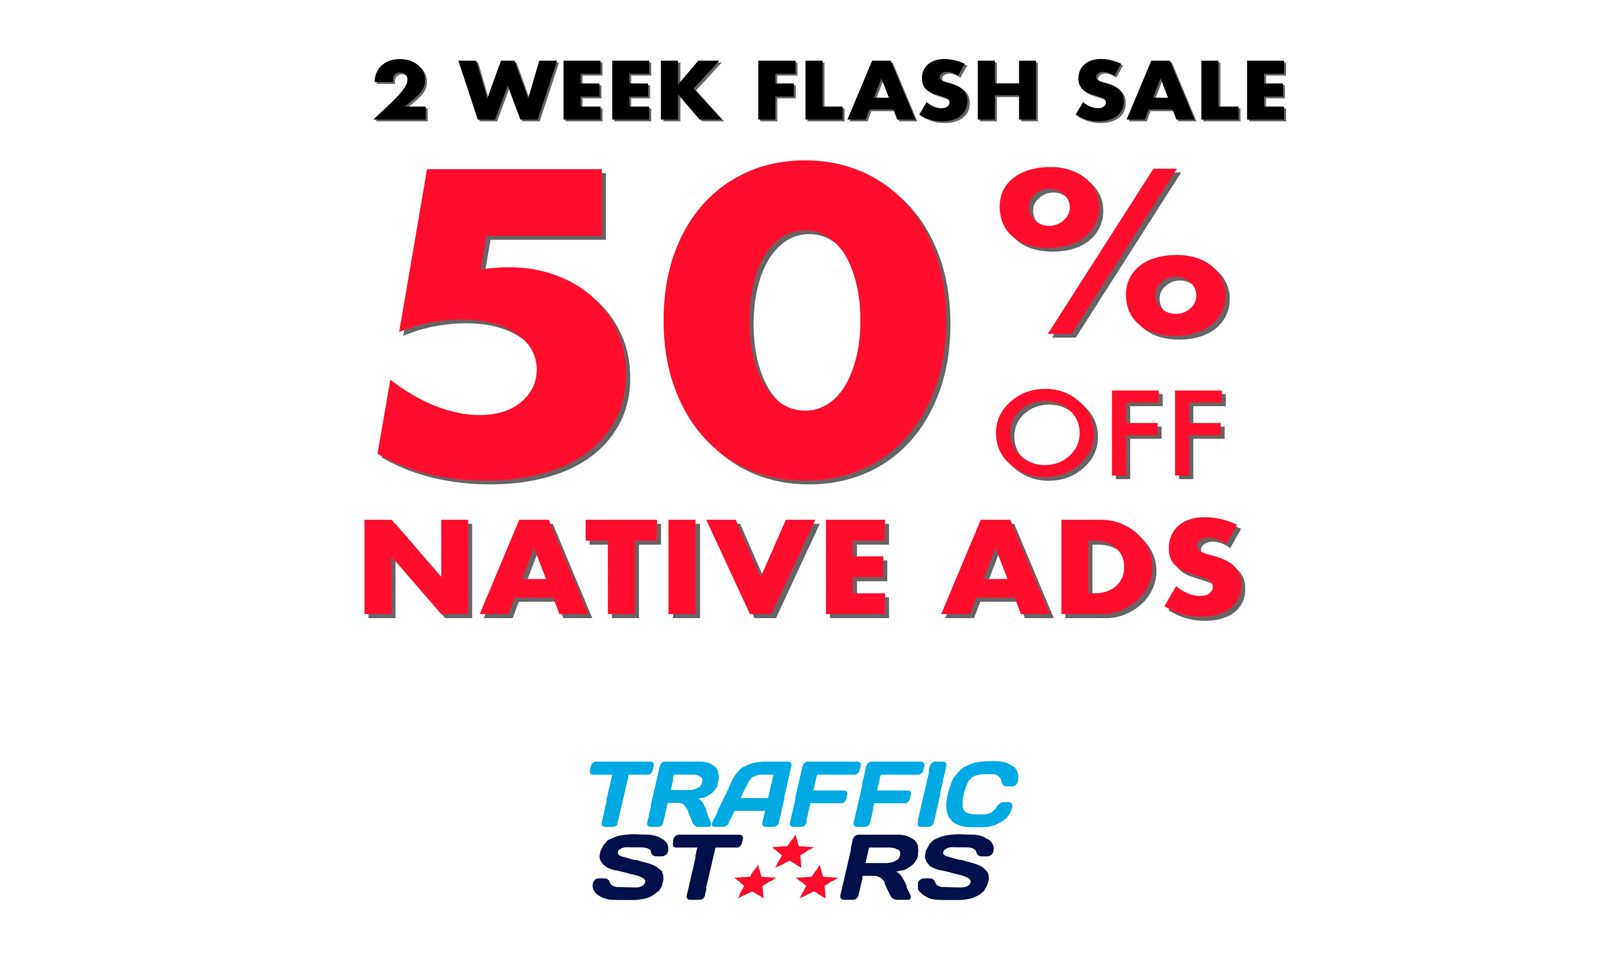 TrafficStars Offers Native Ads Flash Sale with 50% Cash Back